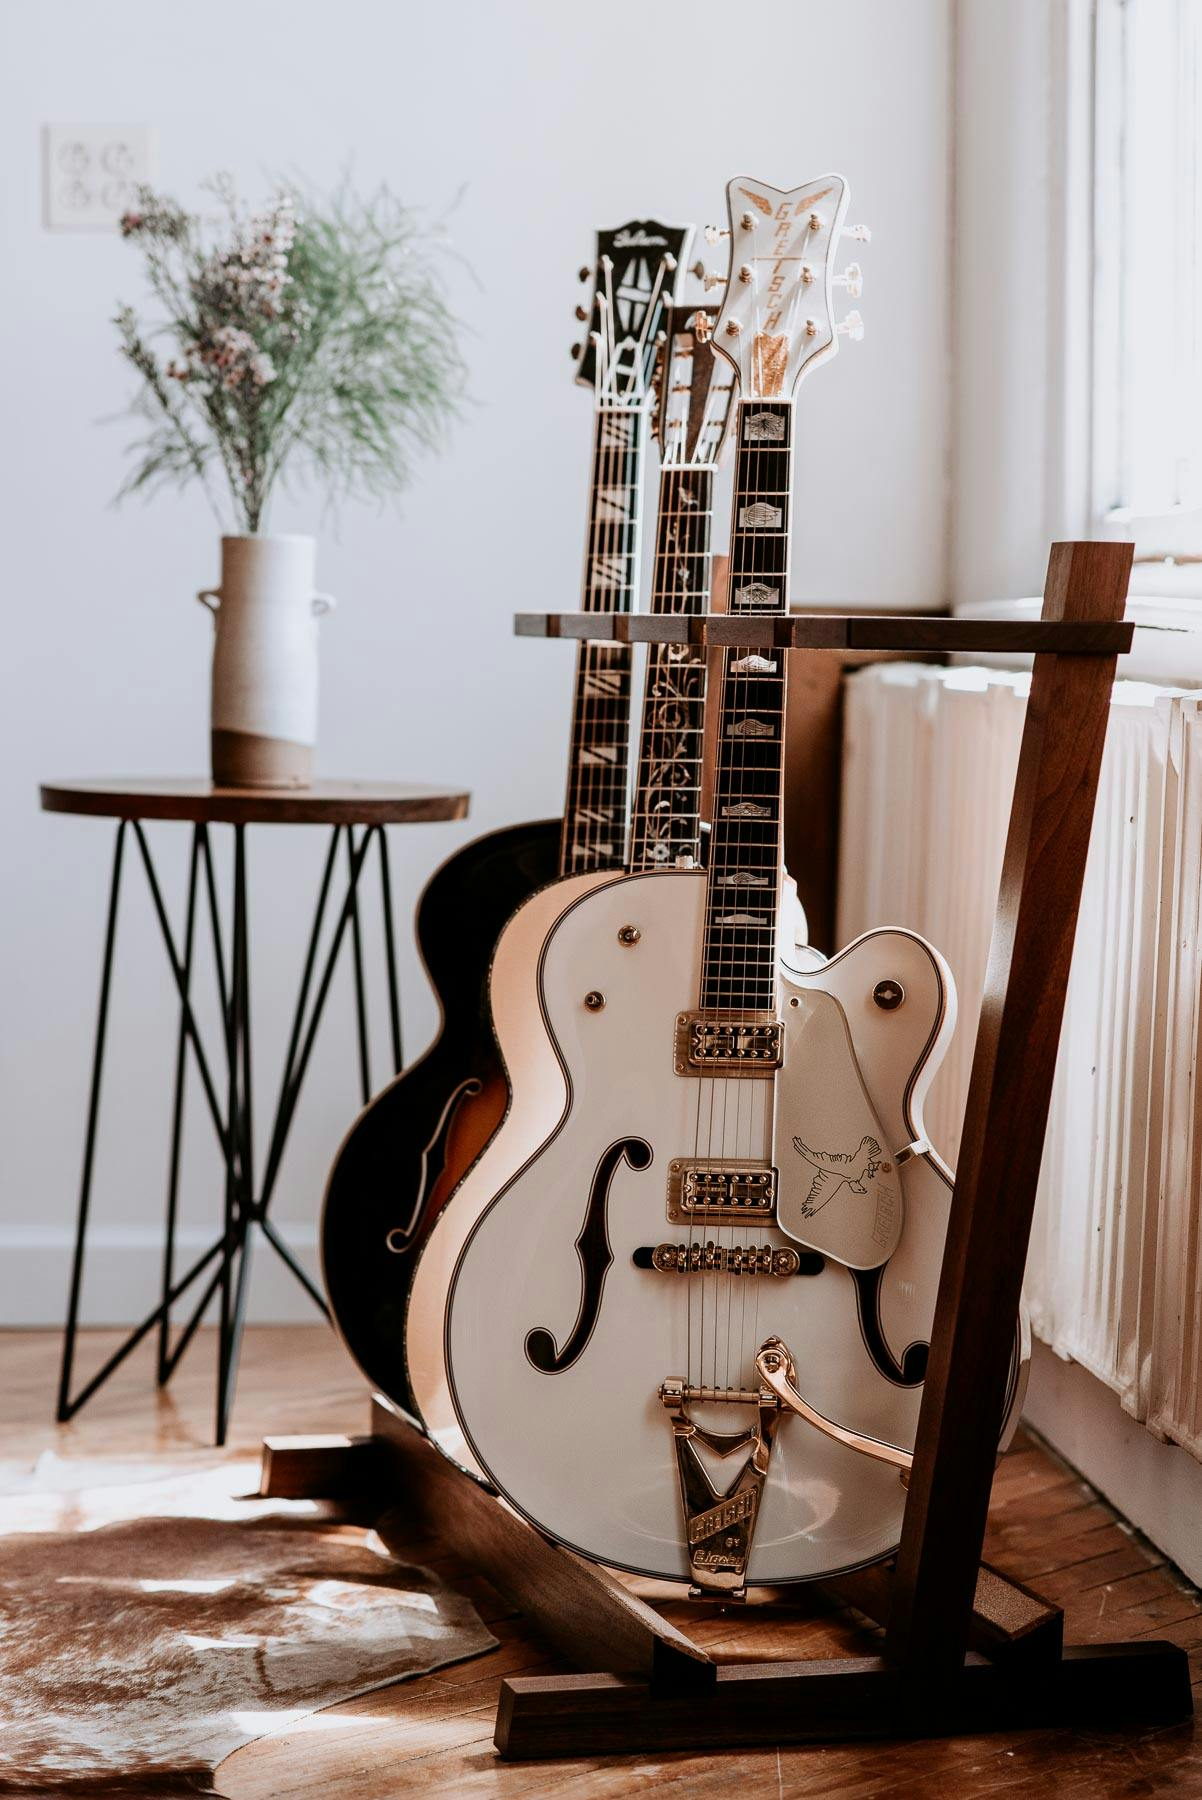 Olin Guitar Stand